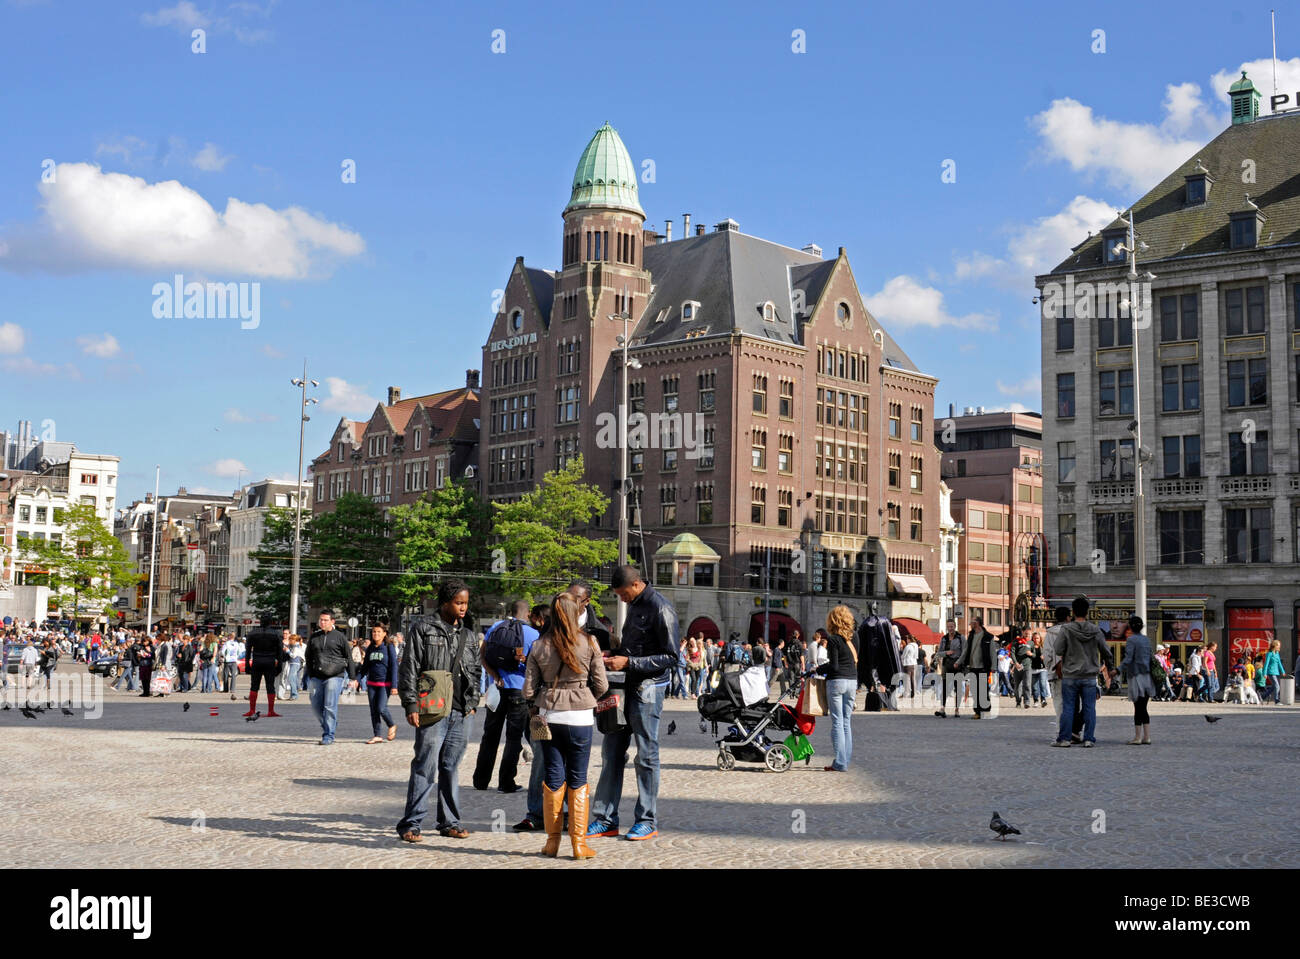 Central Square Amsterdam City, Amsterdam, Netherlands, Europe Stock Photo